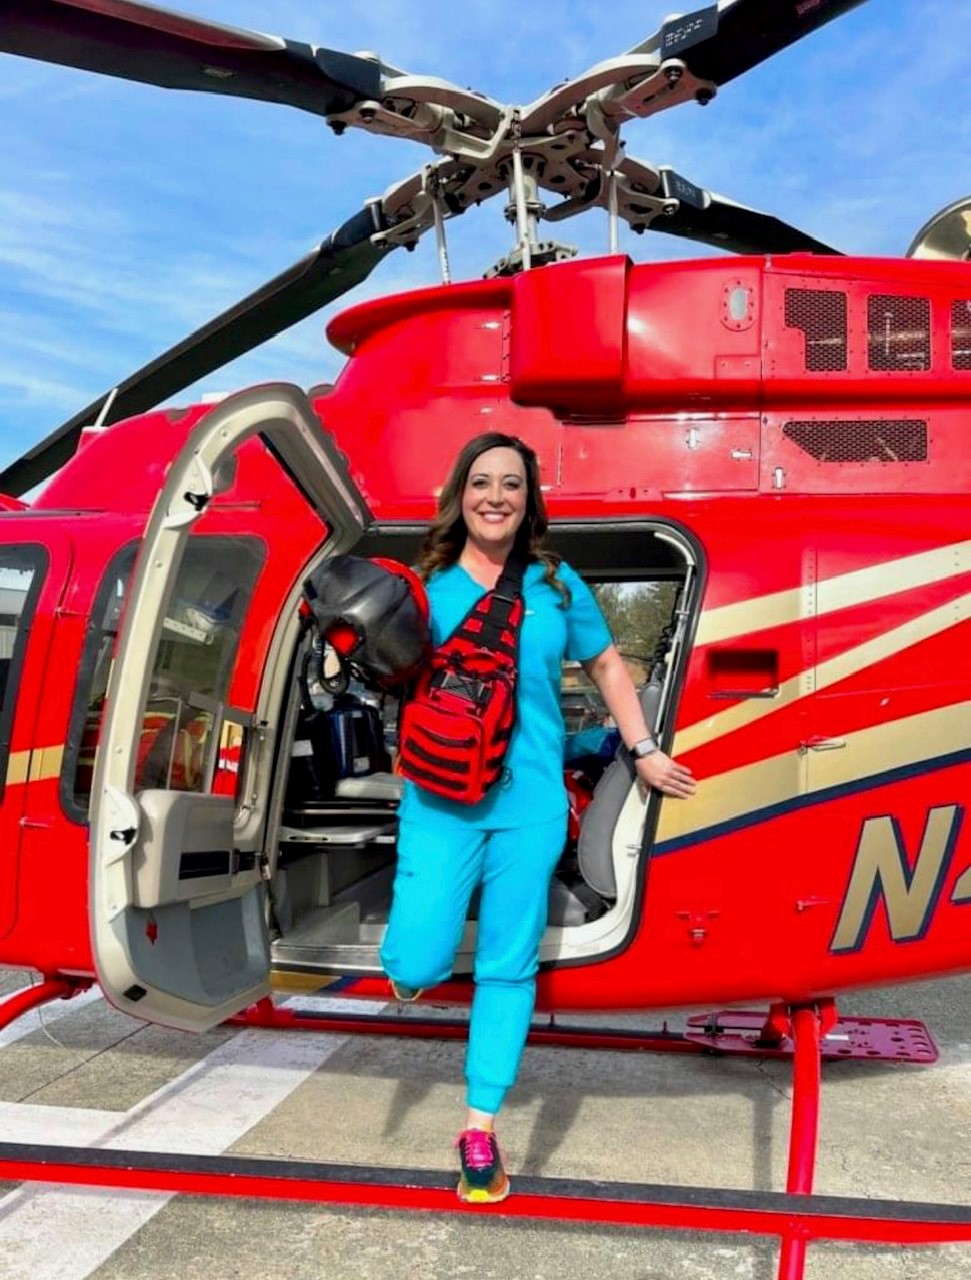 Becoming an Aeromedical Team Member – It’s not just for Nurses